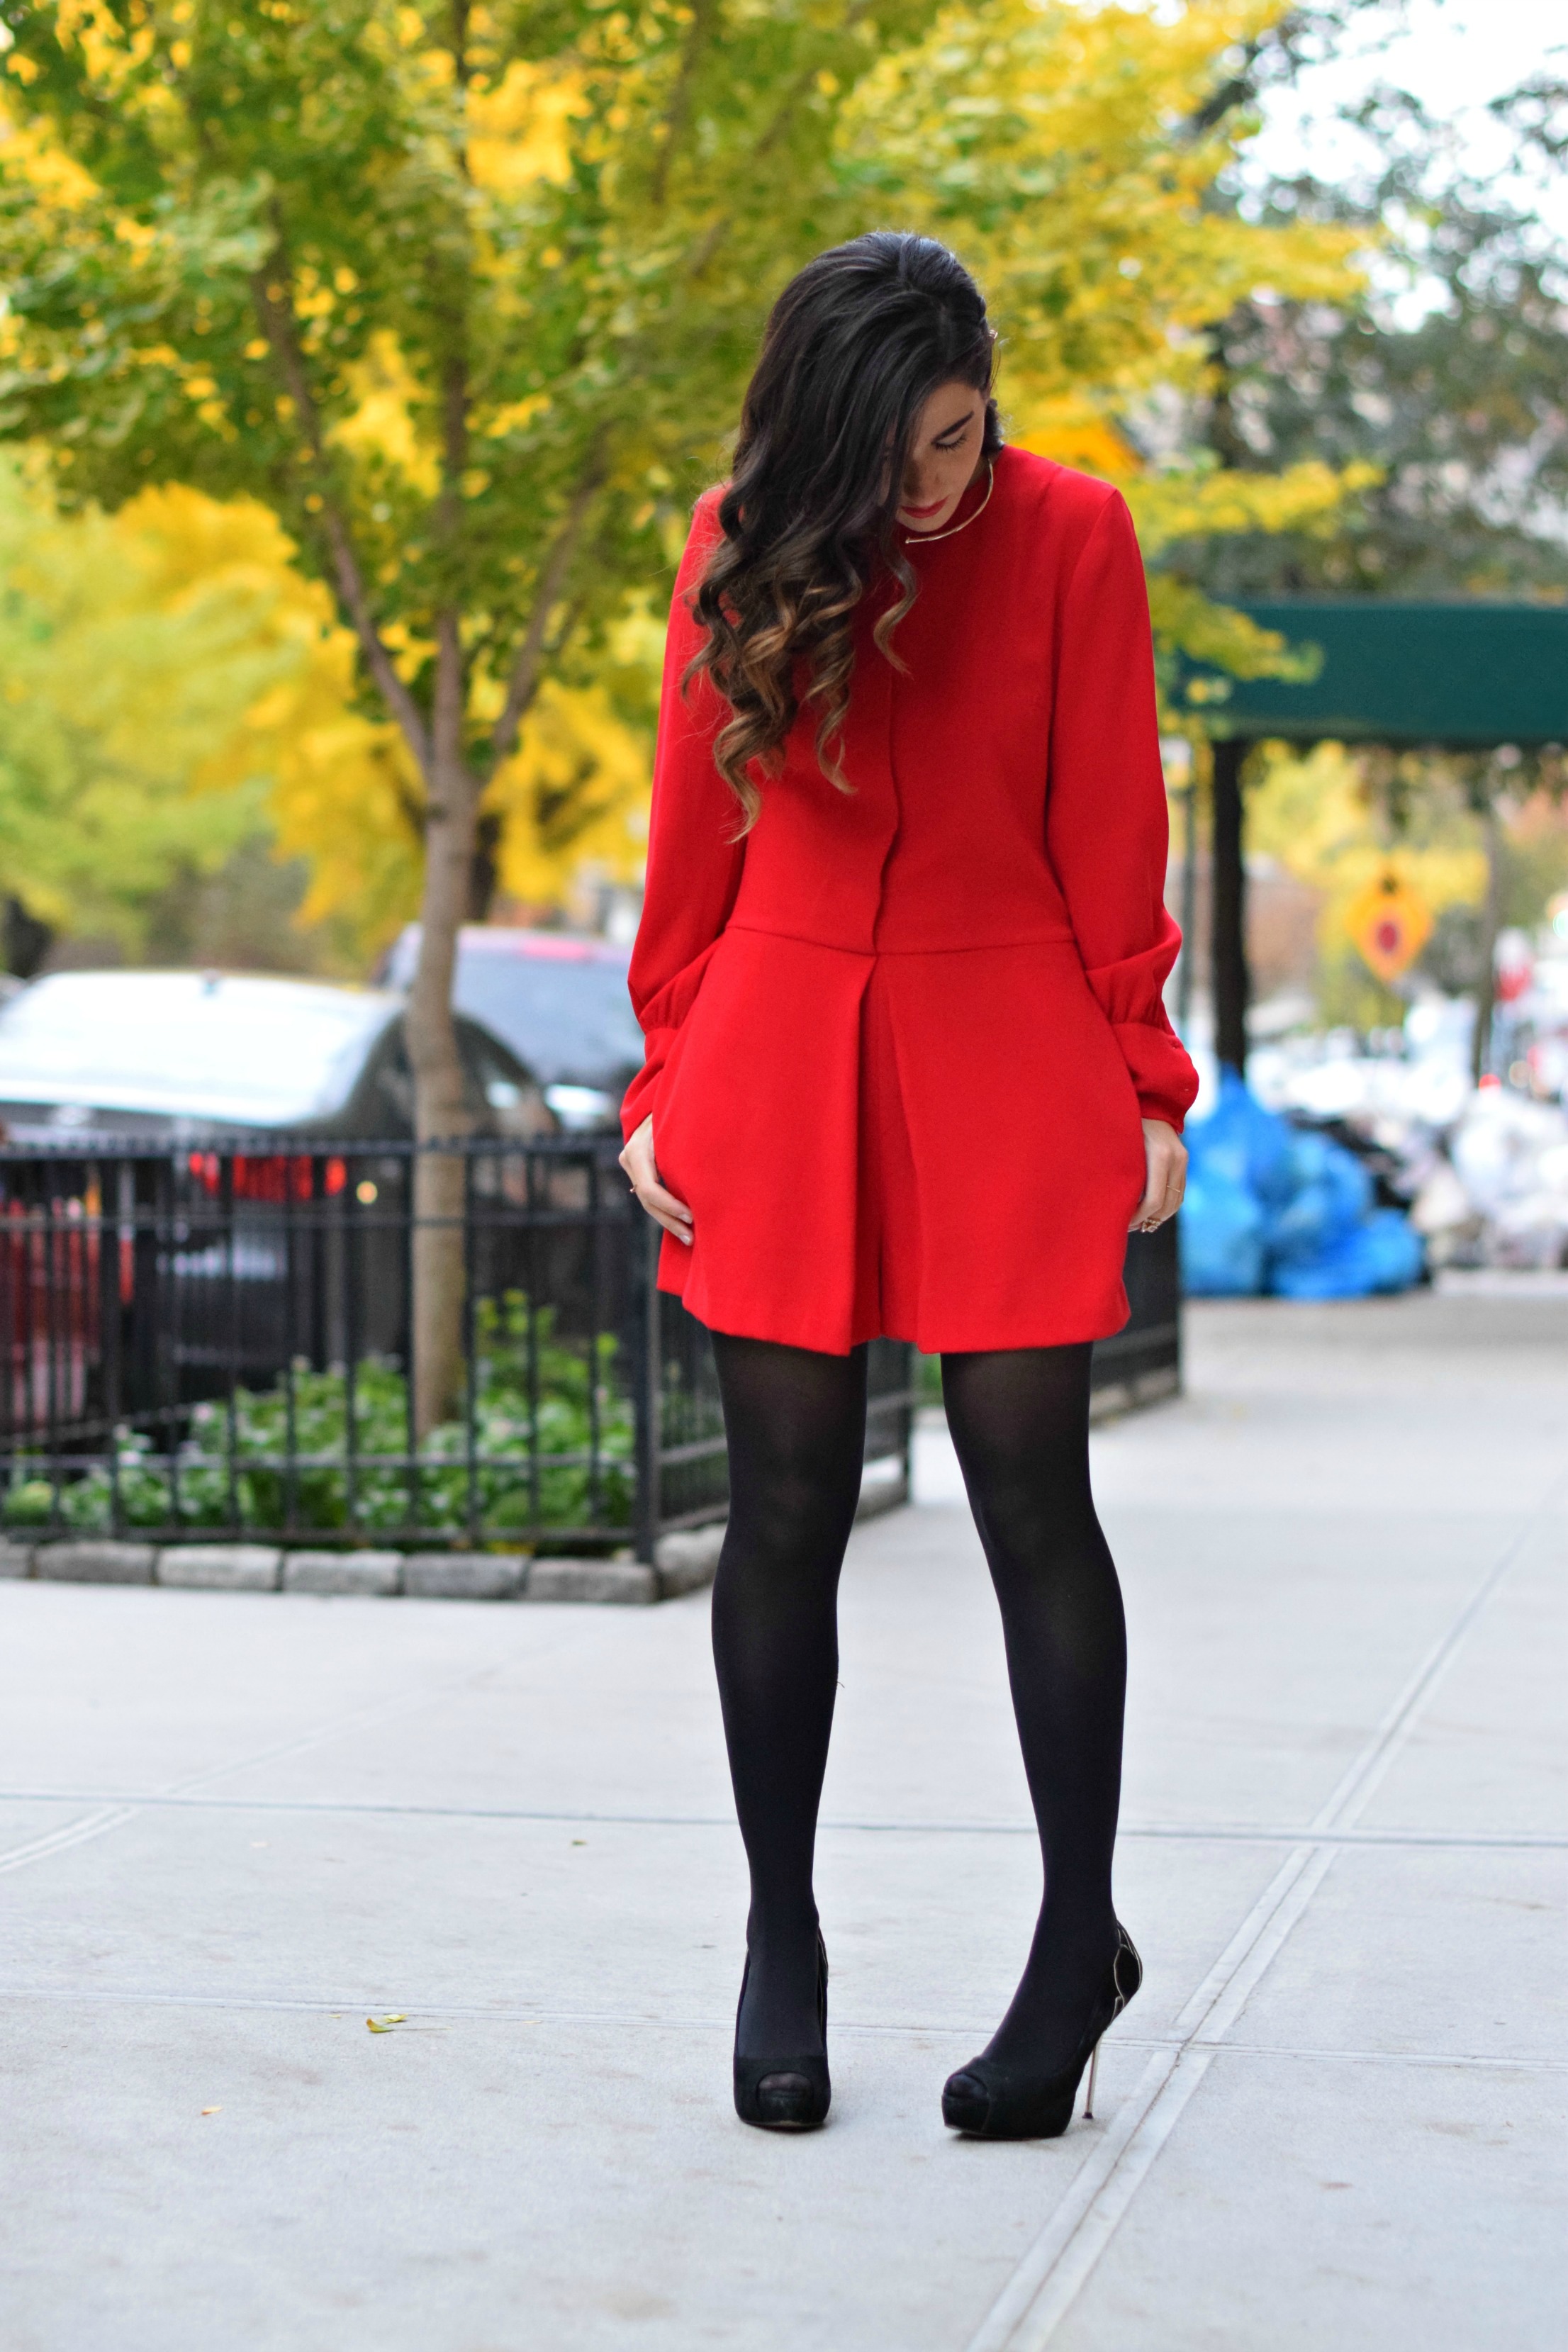 Red Romper Black Tights Louboutins & Love Fashion Blog Esther Santer NYC Street Style Blogger Winter Fall Look Shoes Heels Zara Gold Collar Necklace Braid Hair Inspo Outfit OOTD Photoshoot NYC Girl Women Stiletto Wear Shop Model Clothing Accessories.jpg